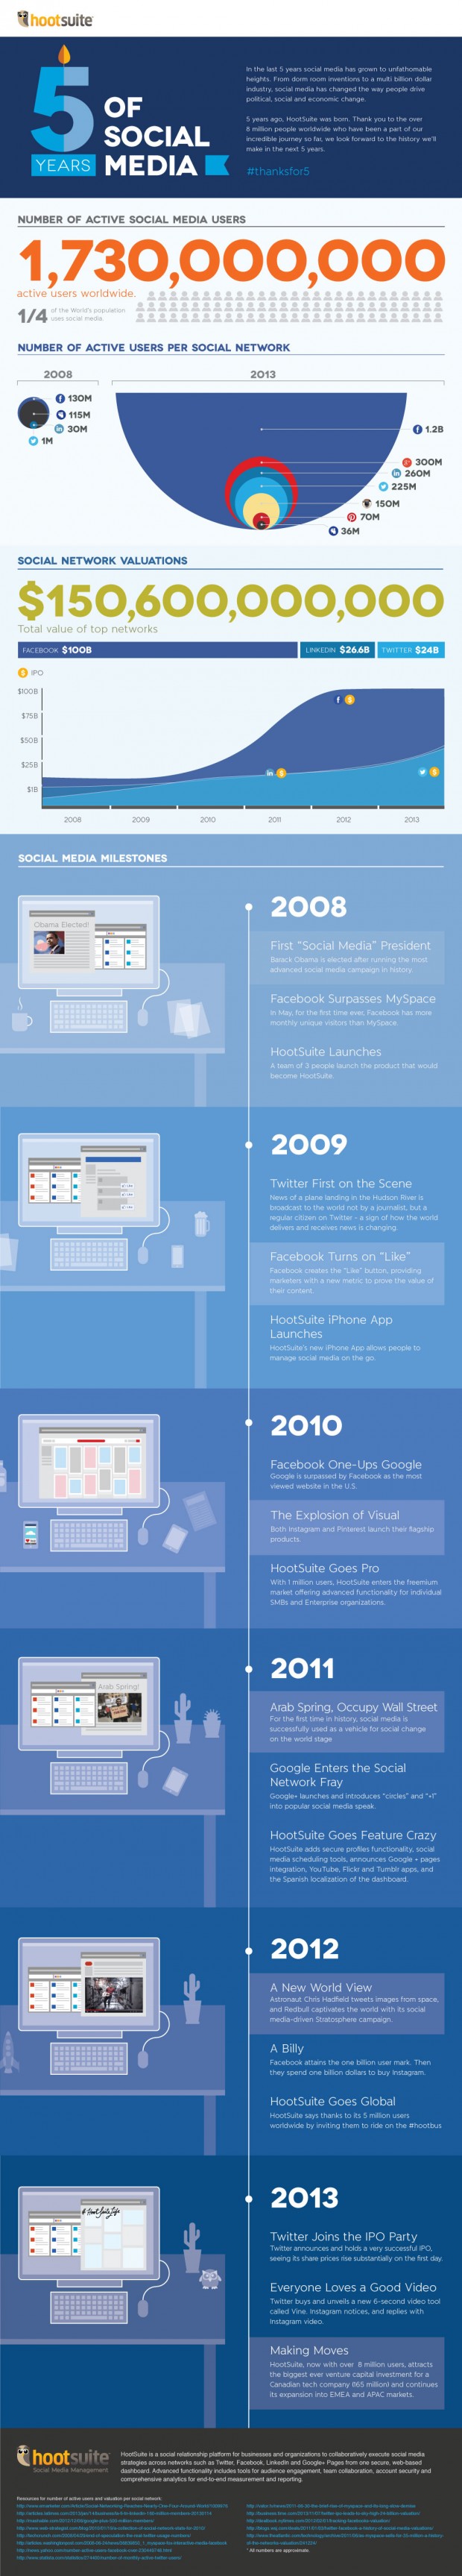 5yearsofsocial-infographic